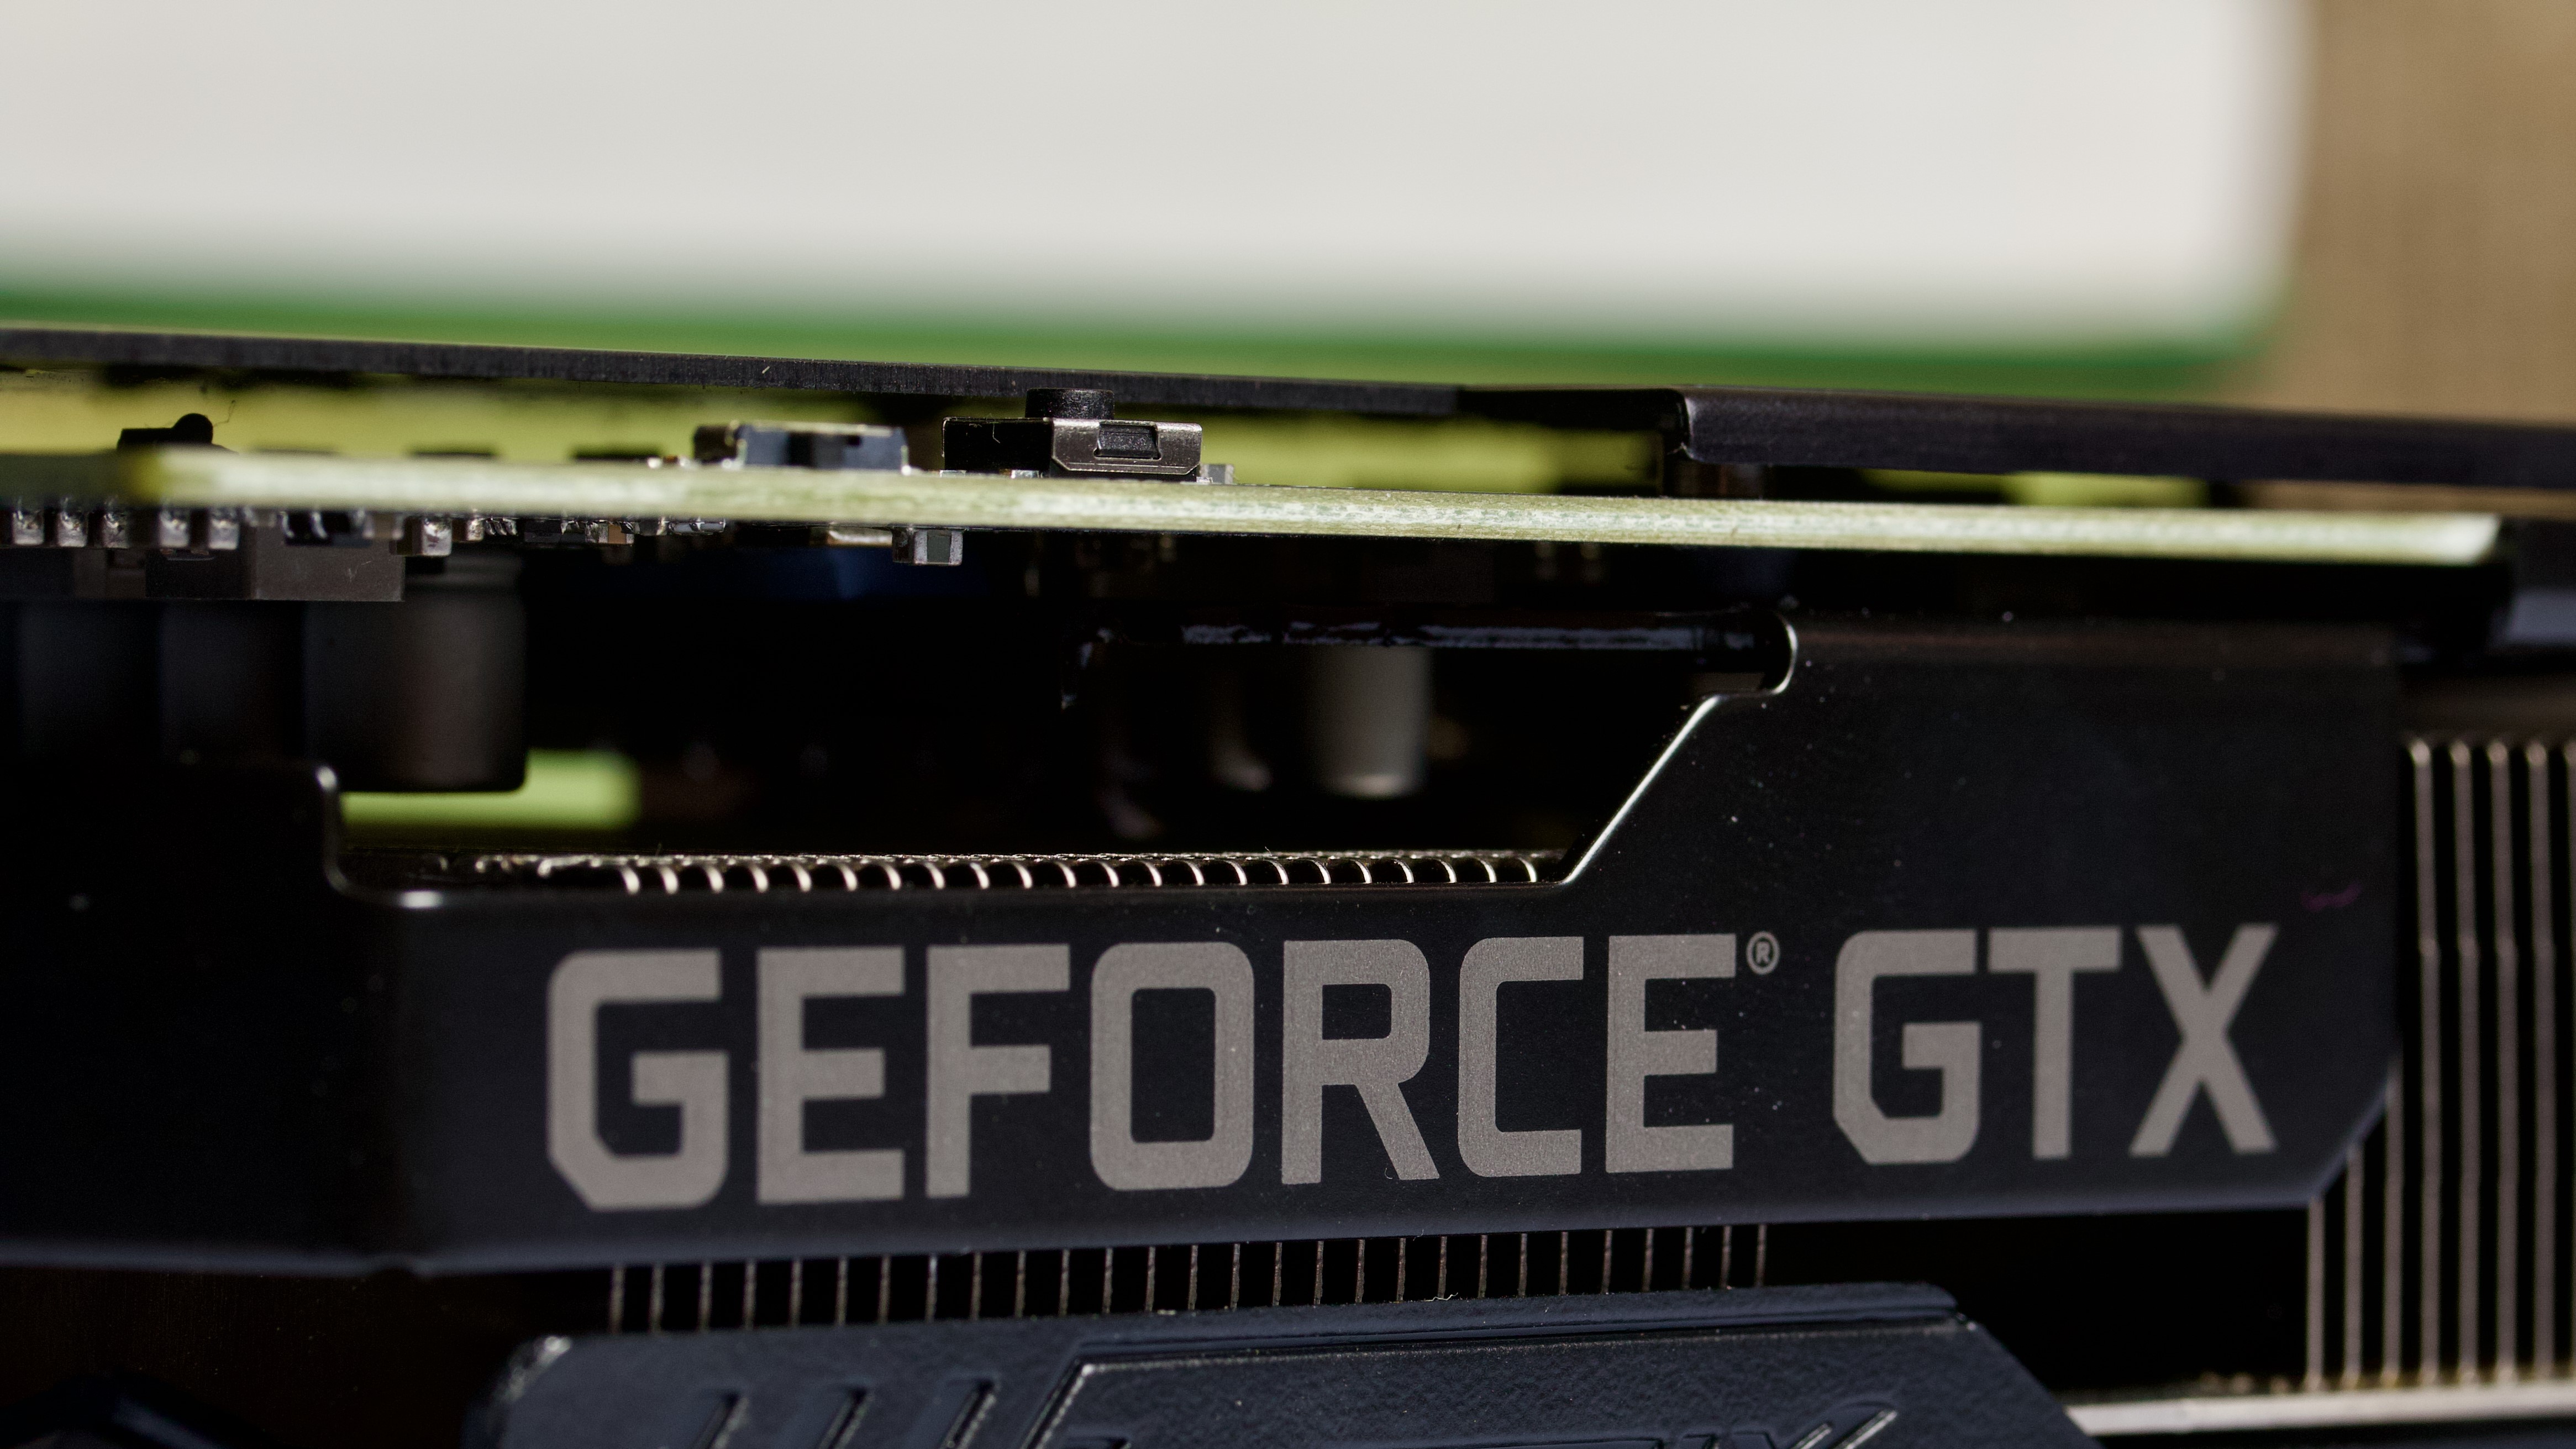  The GTX 1650 is now the most commonly used GPU among Steam users  